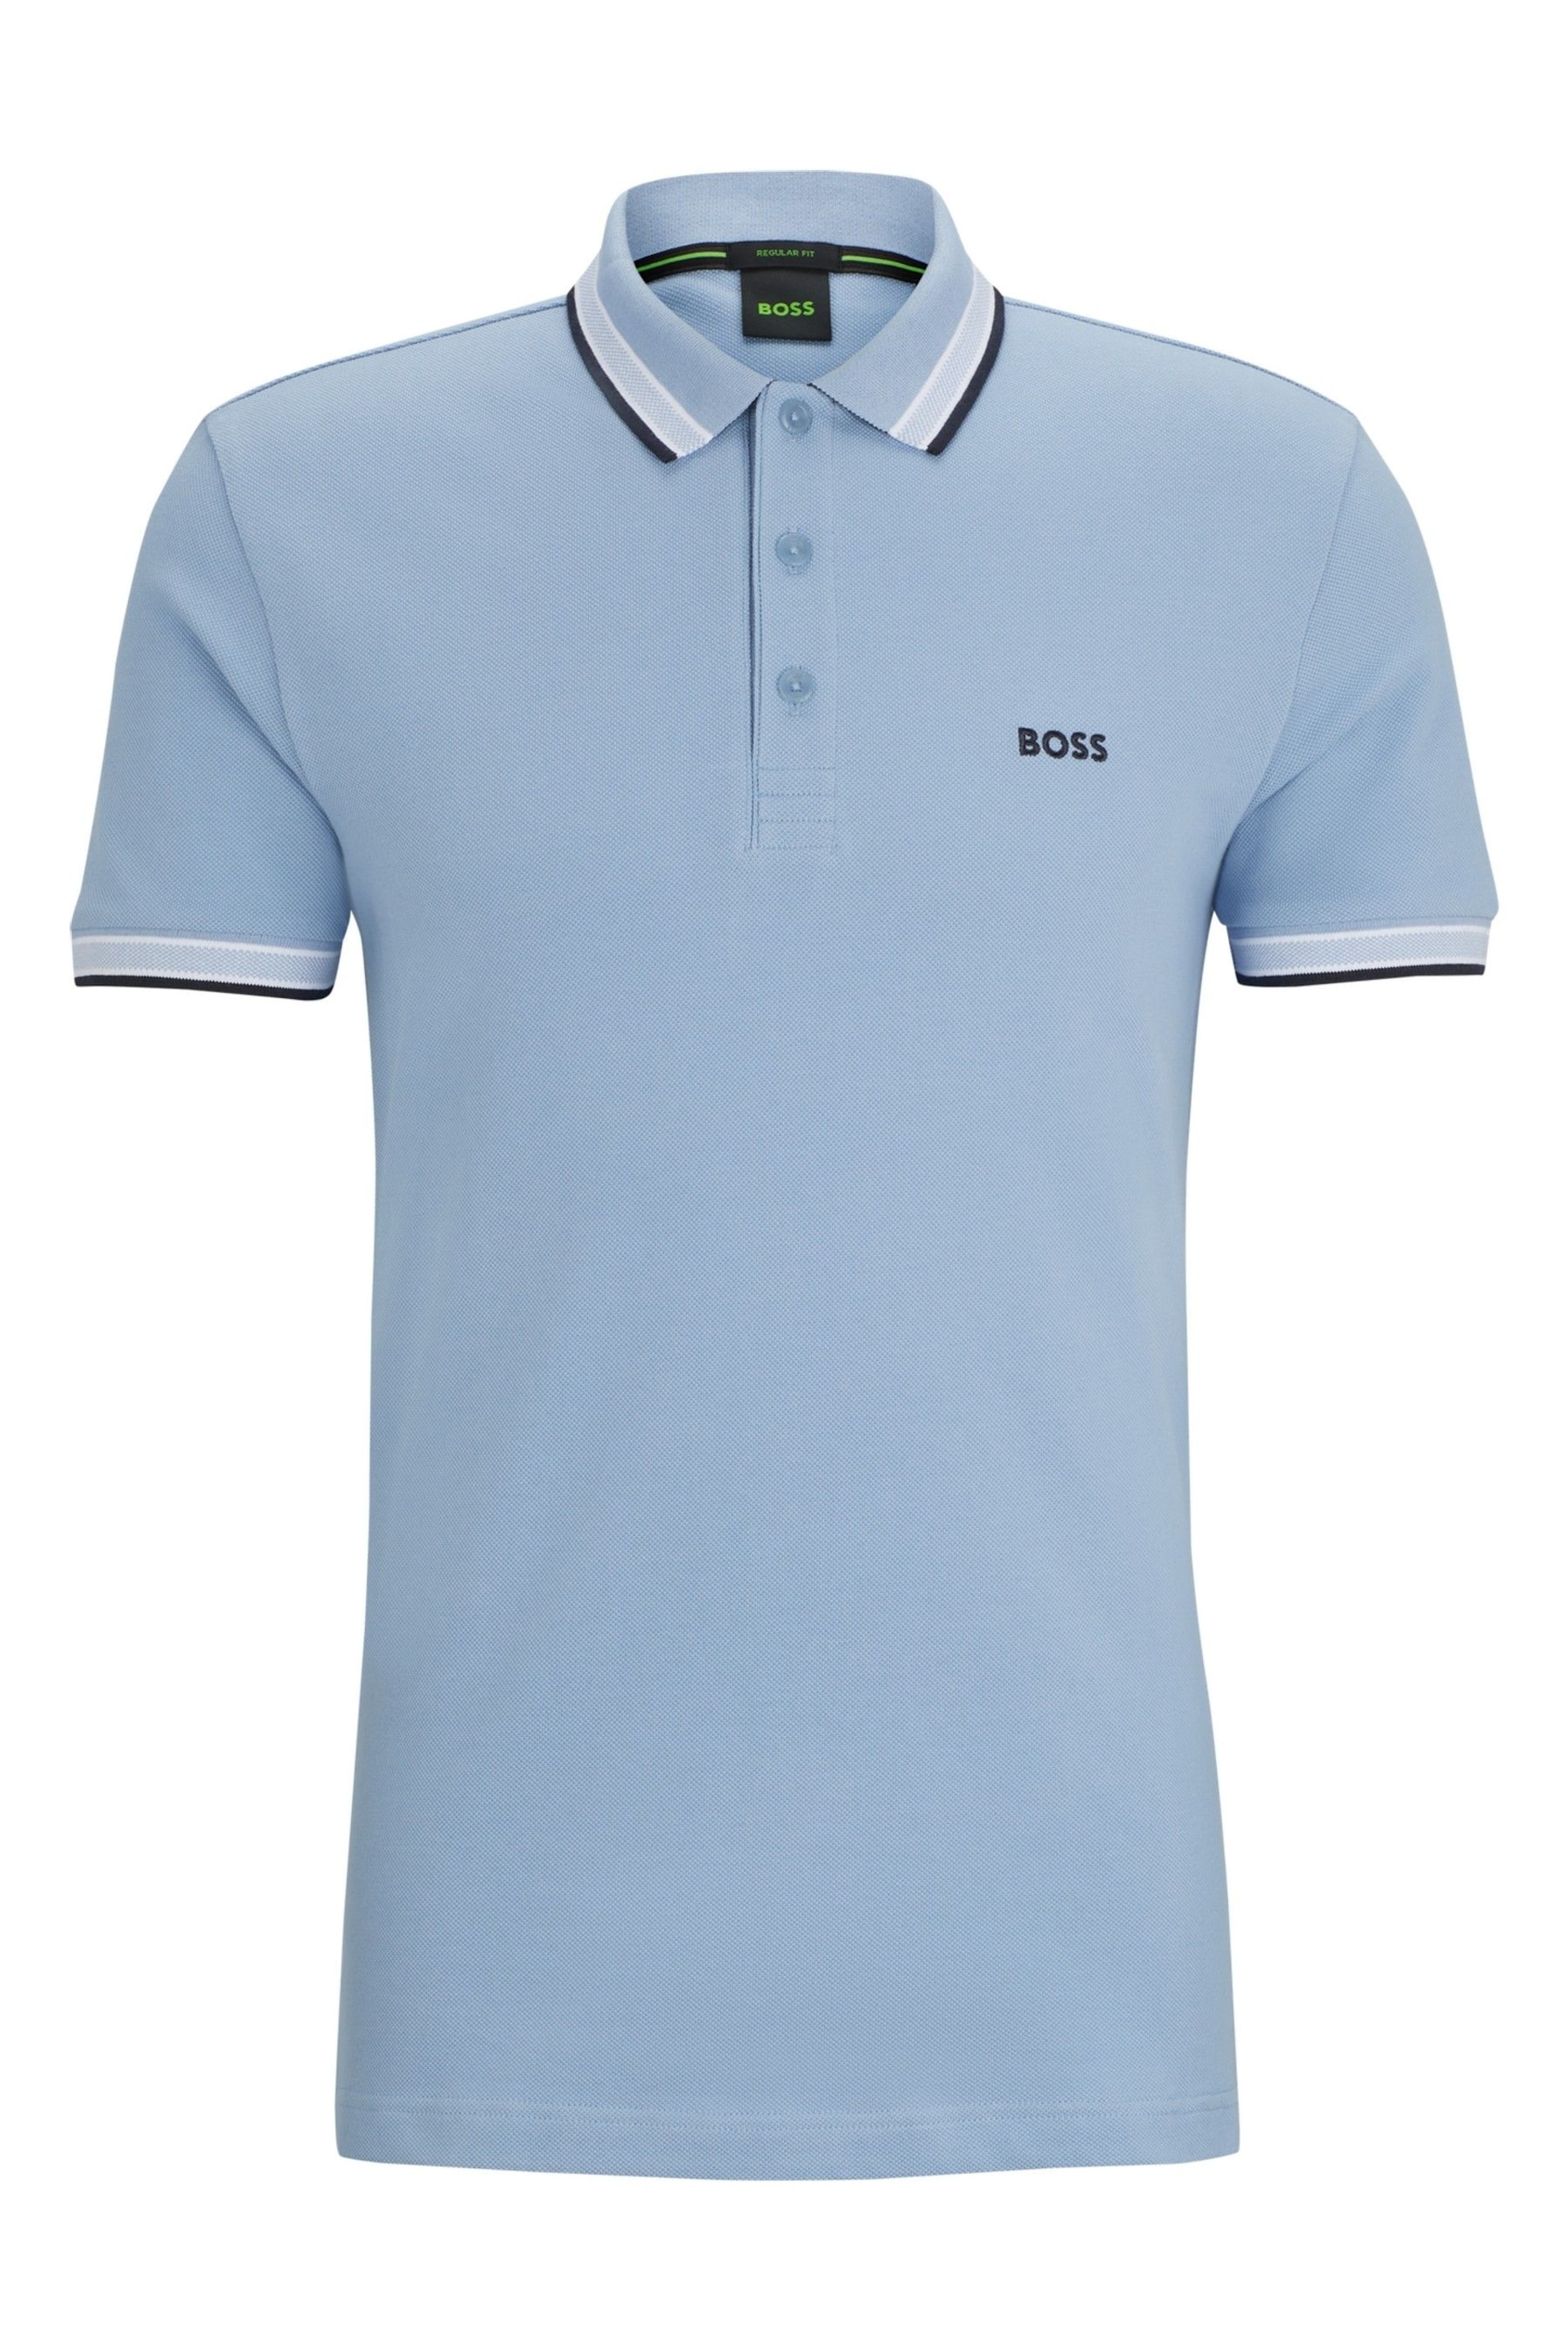 BOSS Sky Blue/Black Tipping Paddy Polo Shirt - Image 5 of 5